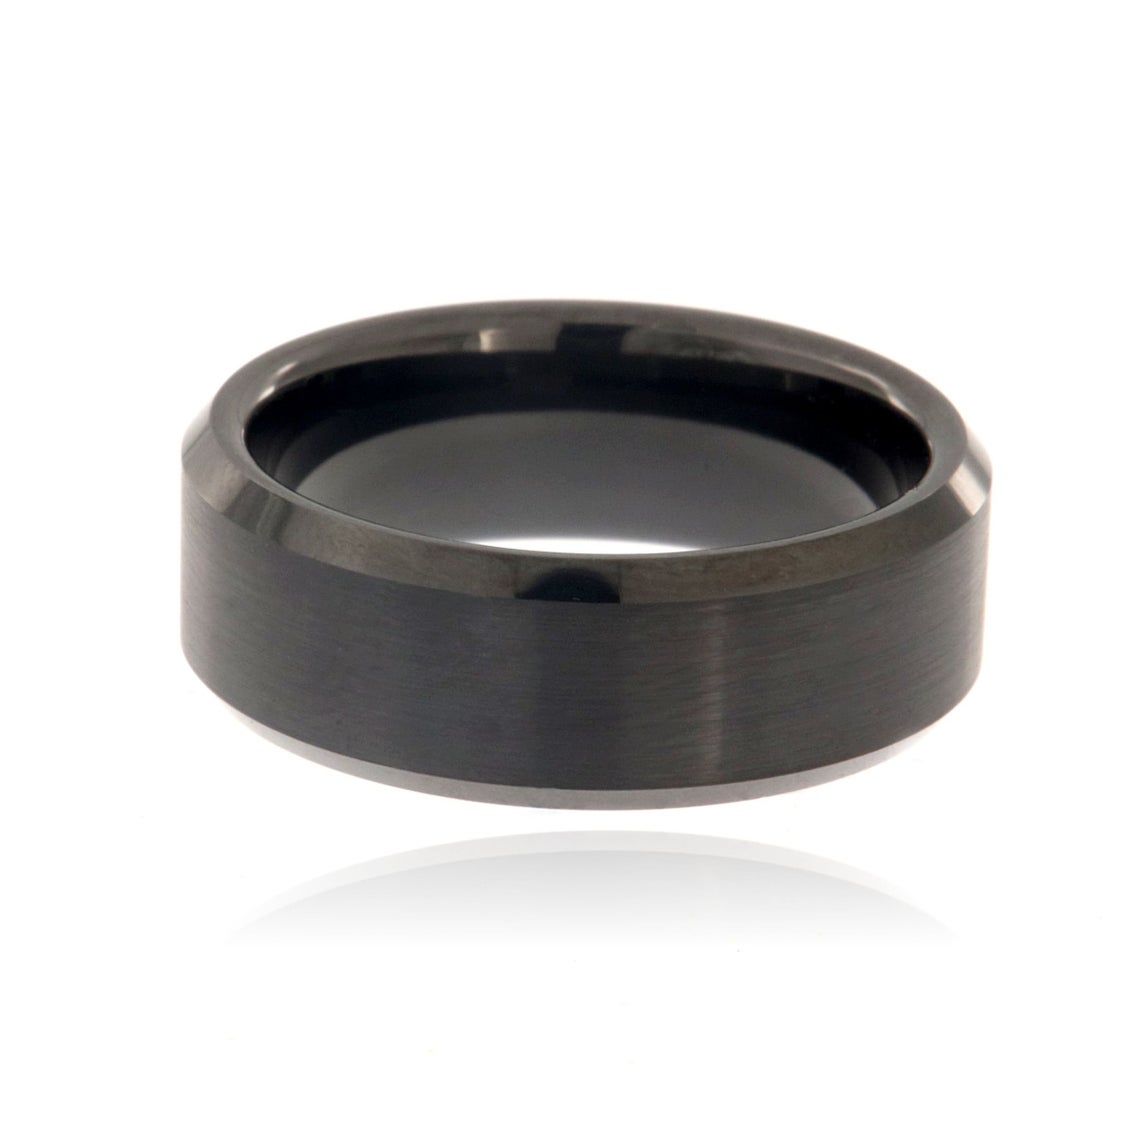 8mm wide tungsten ring with a black finish and beveled edges